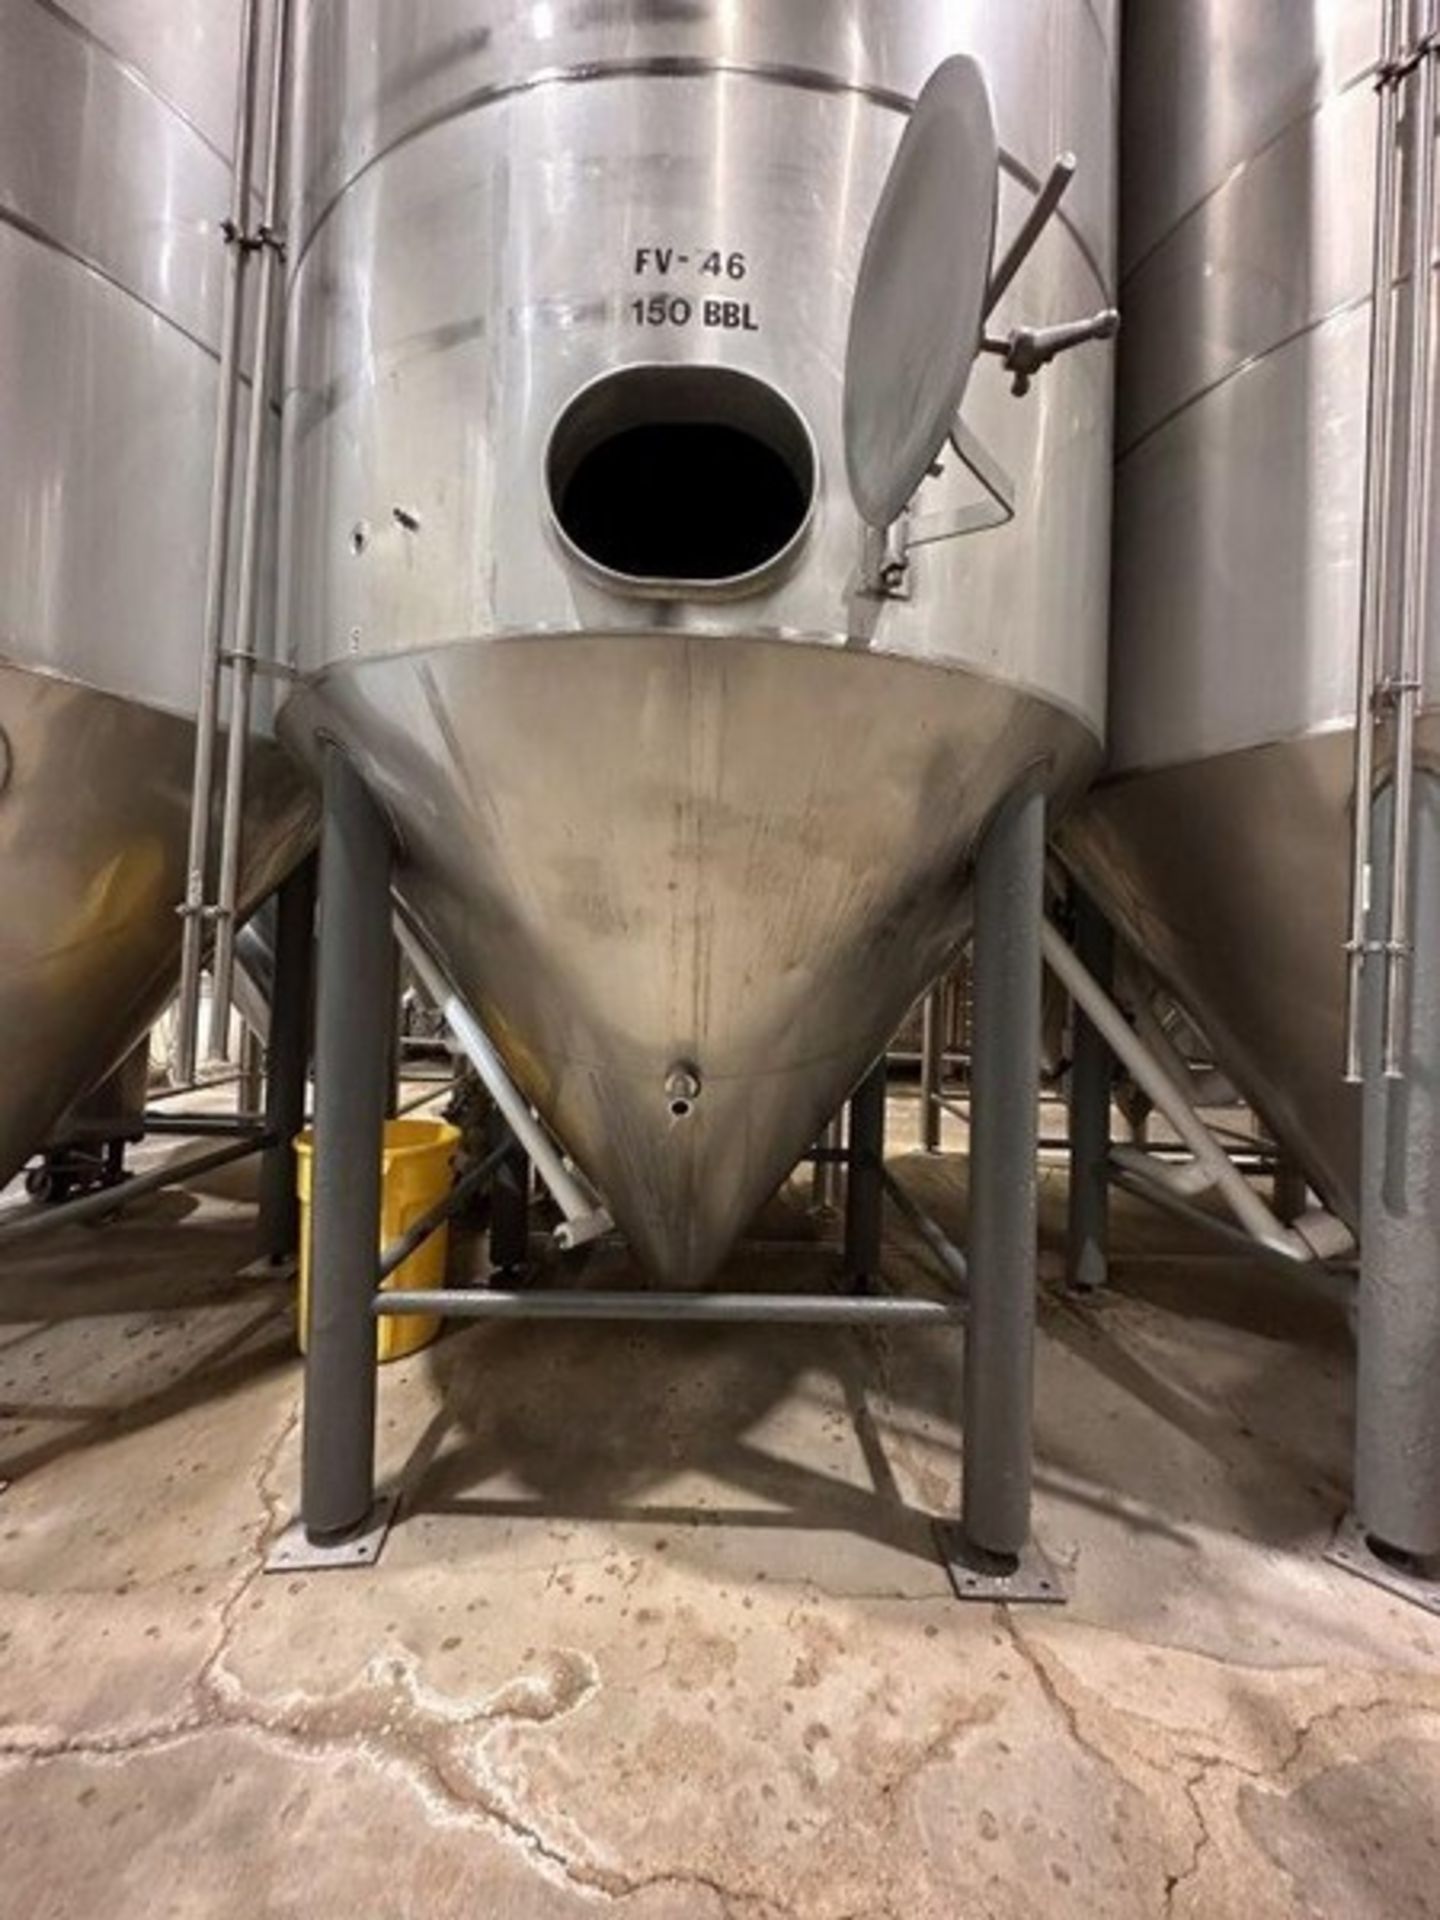 150 BBL (4650 Gallon) Vertical Cone Bottom 304 Stainless Steel Jacketed Vessel. Manufactured by San - Image 4 of 9